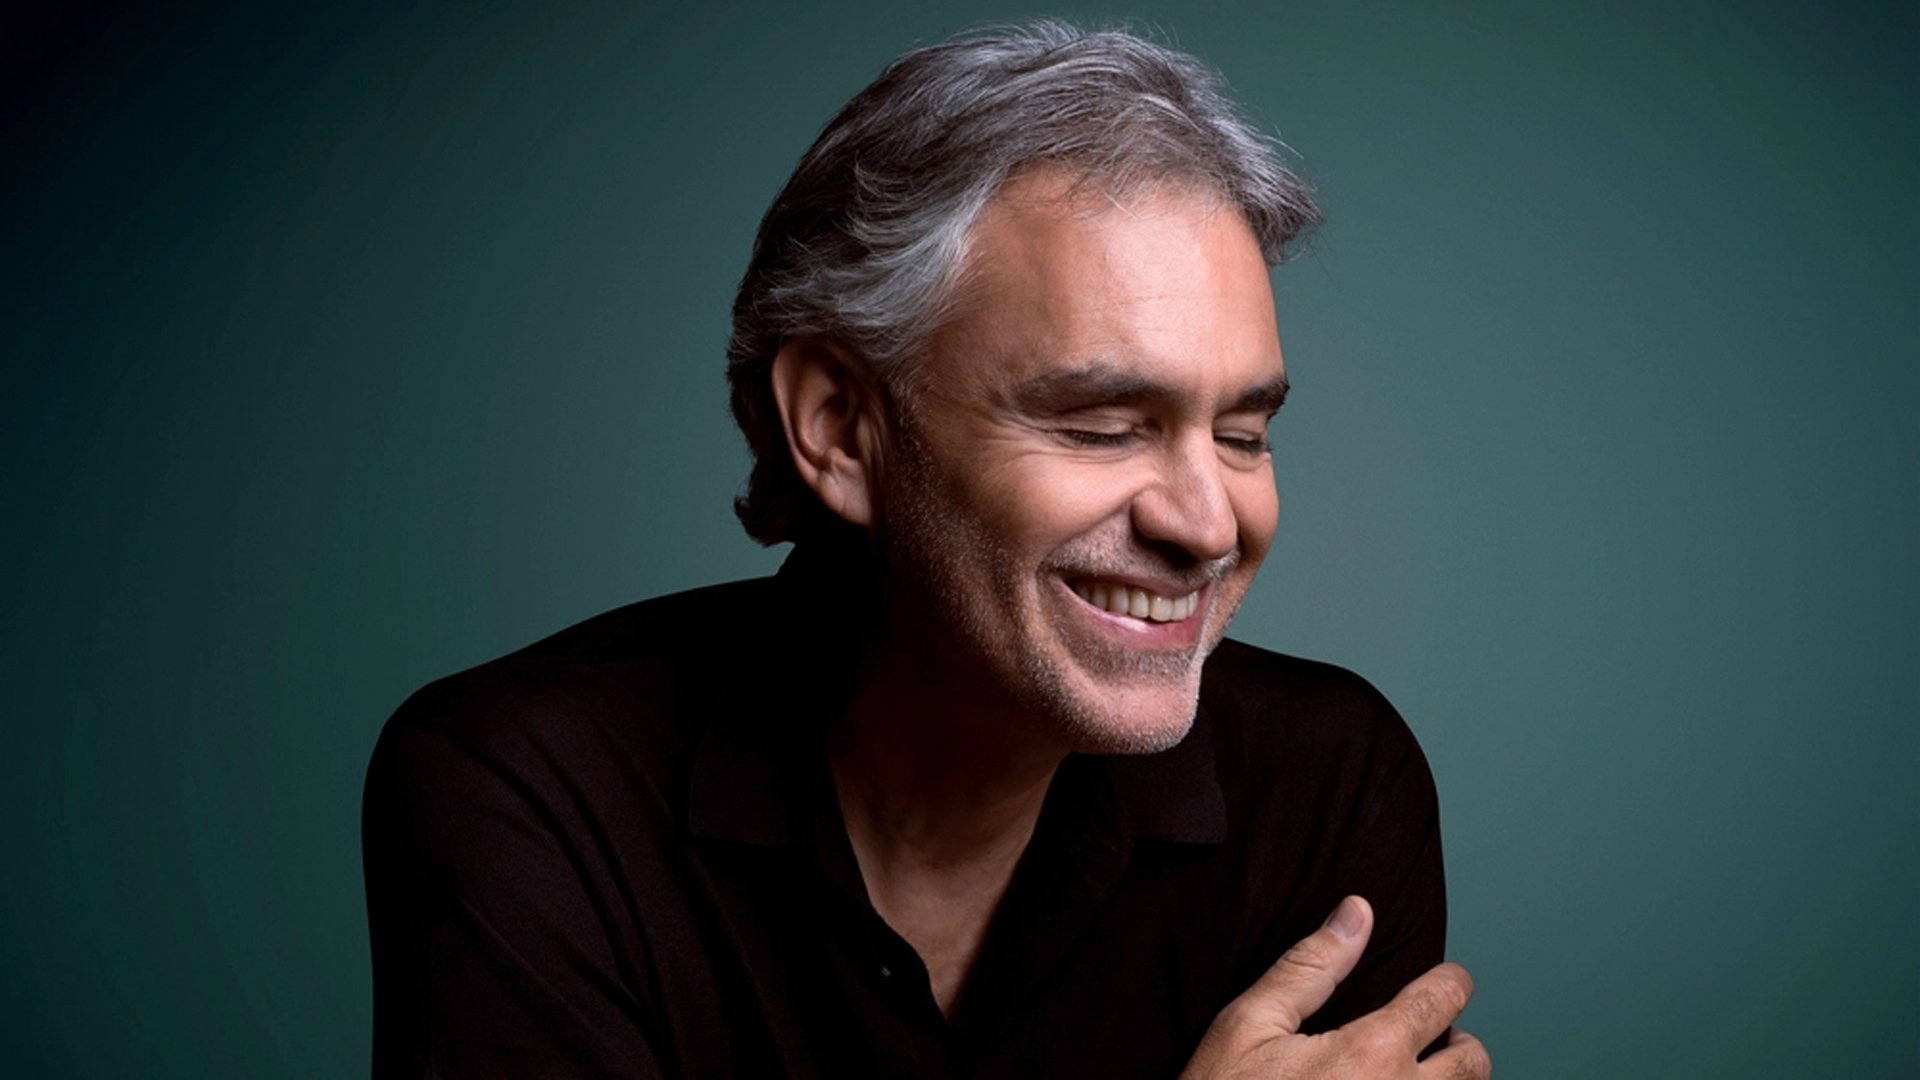 An Evening With The Maestro Andrea Bocelli Exclusive Interview Part I